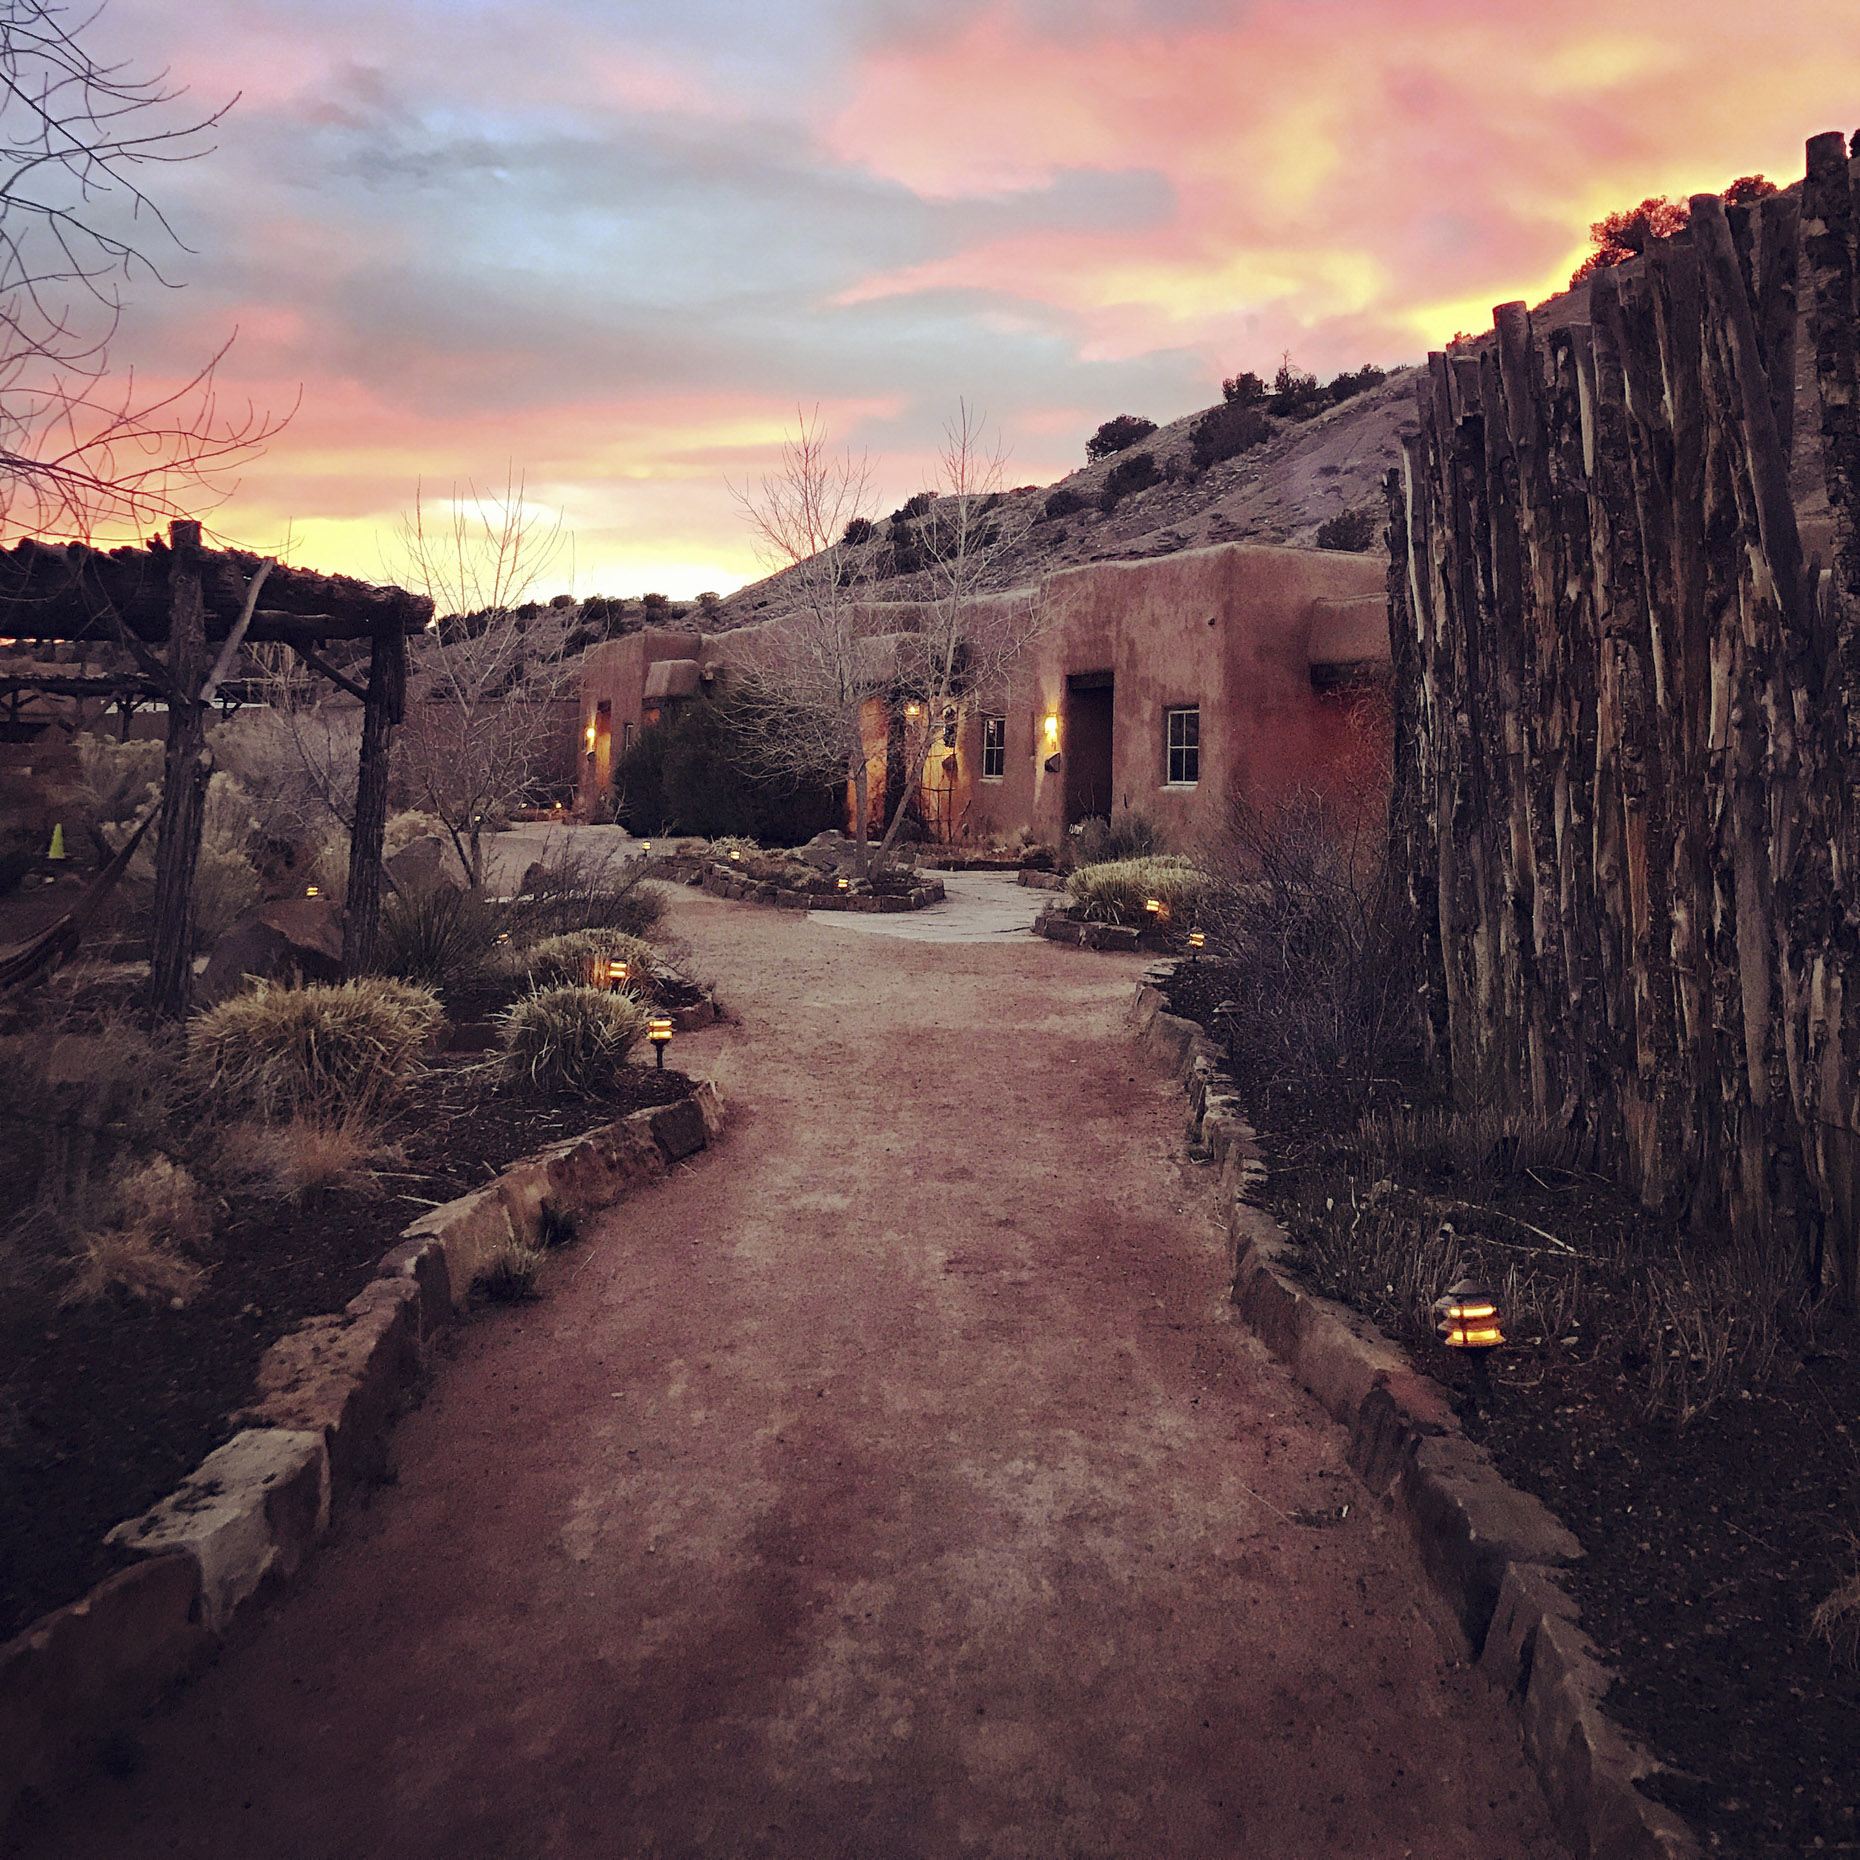 Pathway to adobe building lit up at sunset